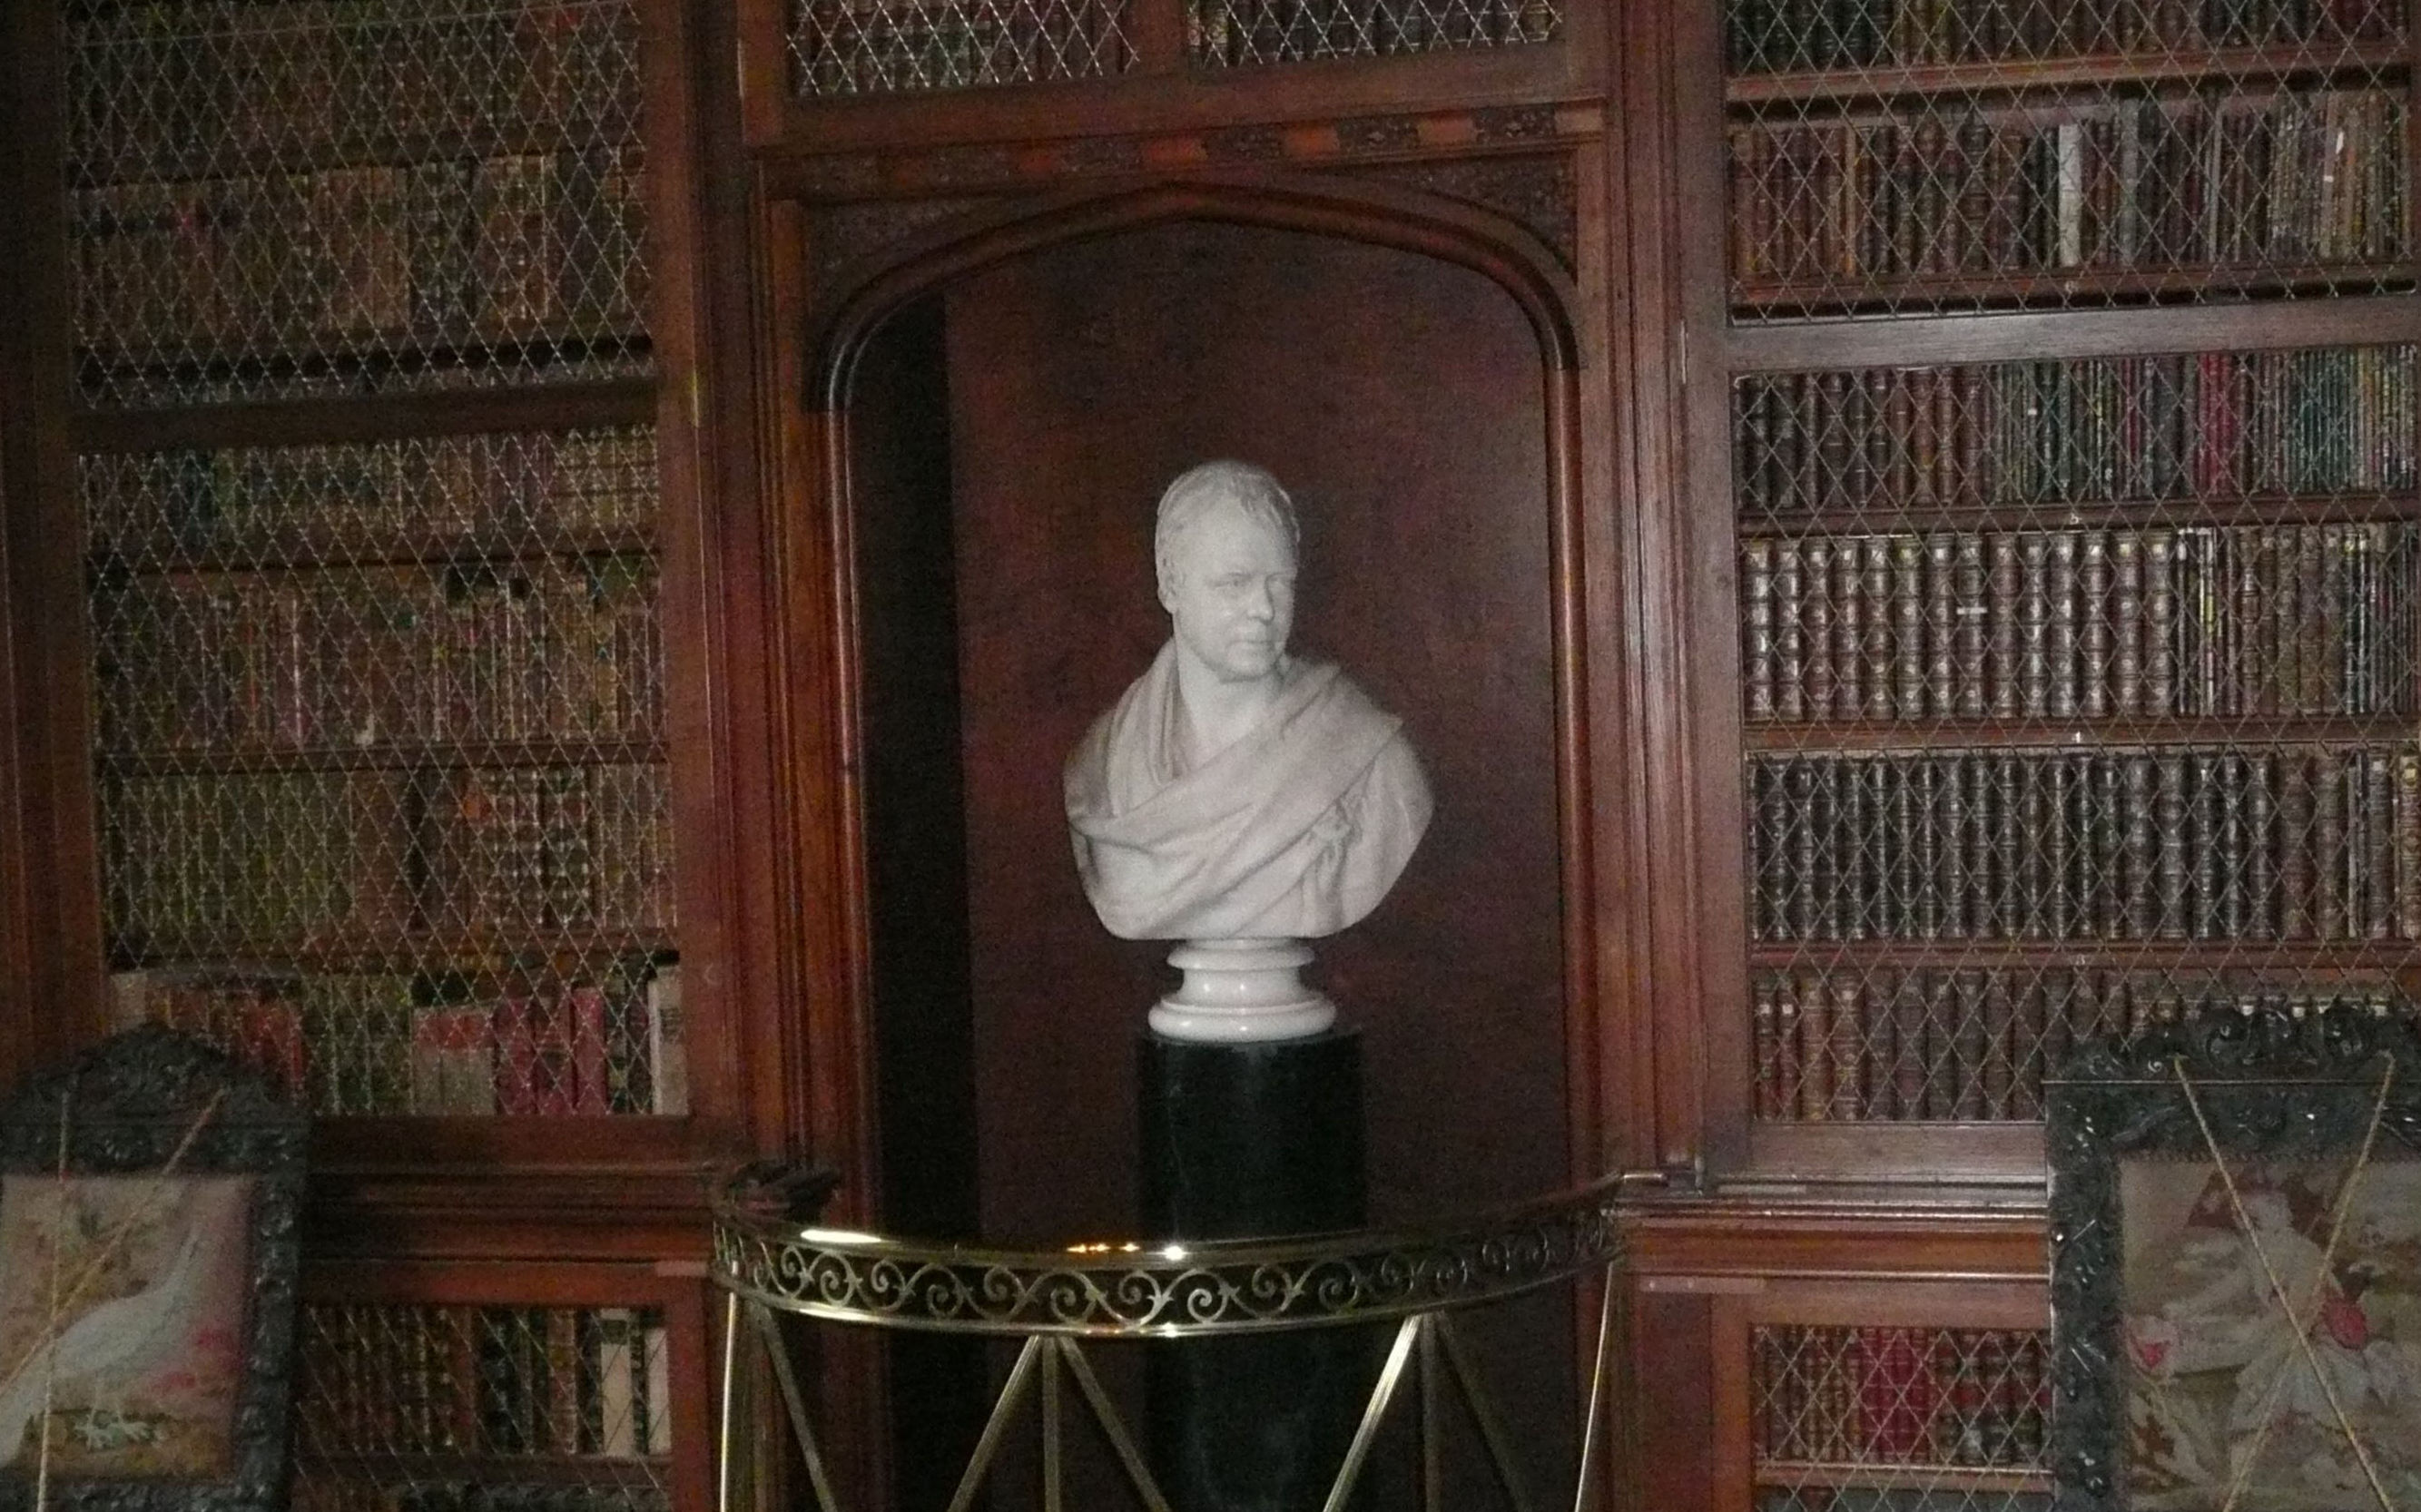 This bust of Sir Walter Scott has a duplicate in Castle Tucker in Wiscasset, Maine. (2008)